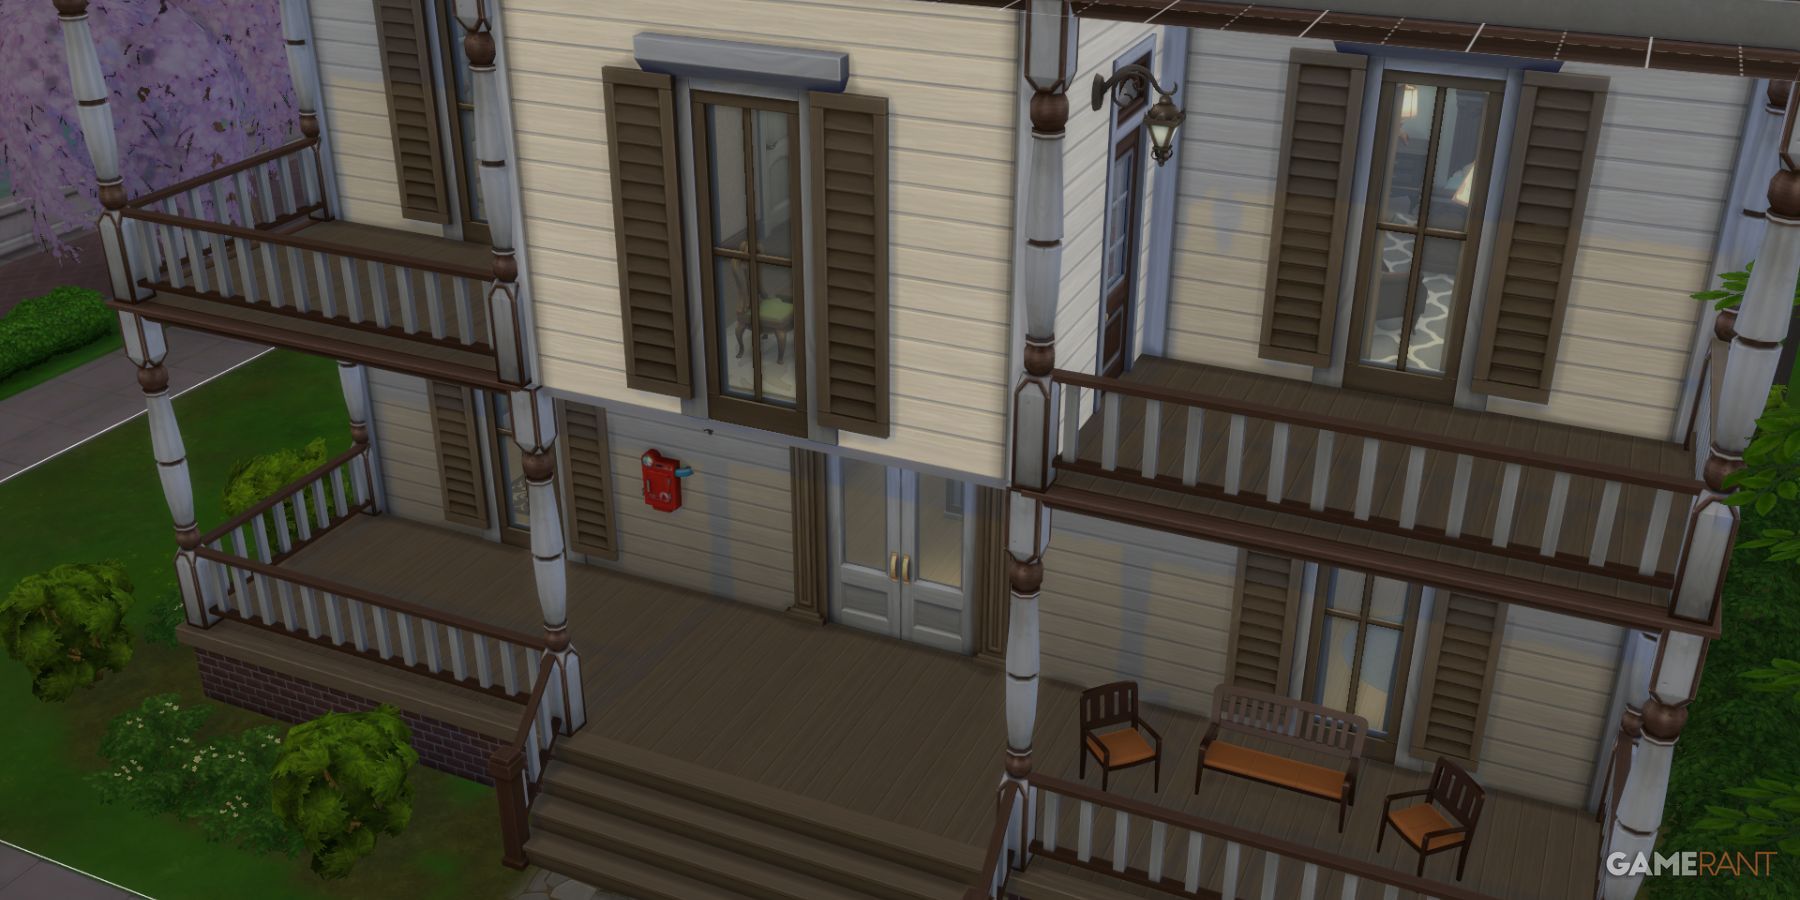 The Sims 4 Willow Creek House Patio